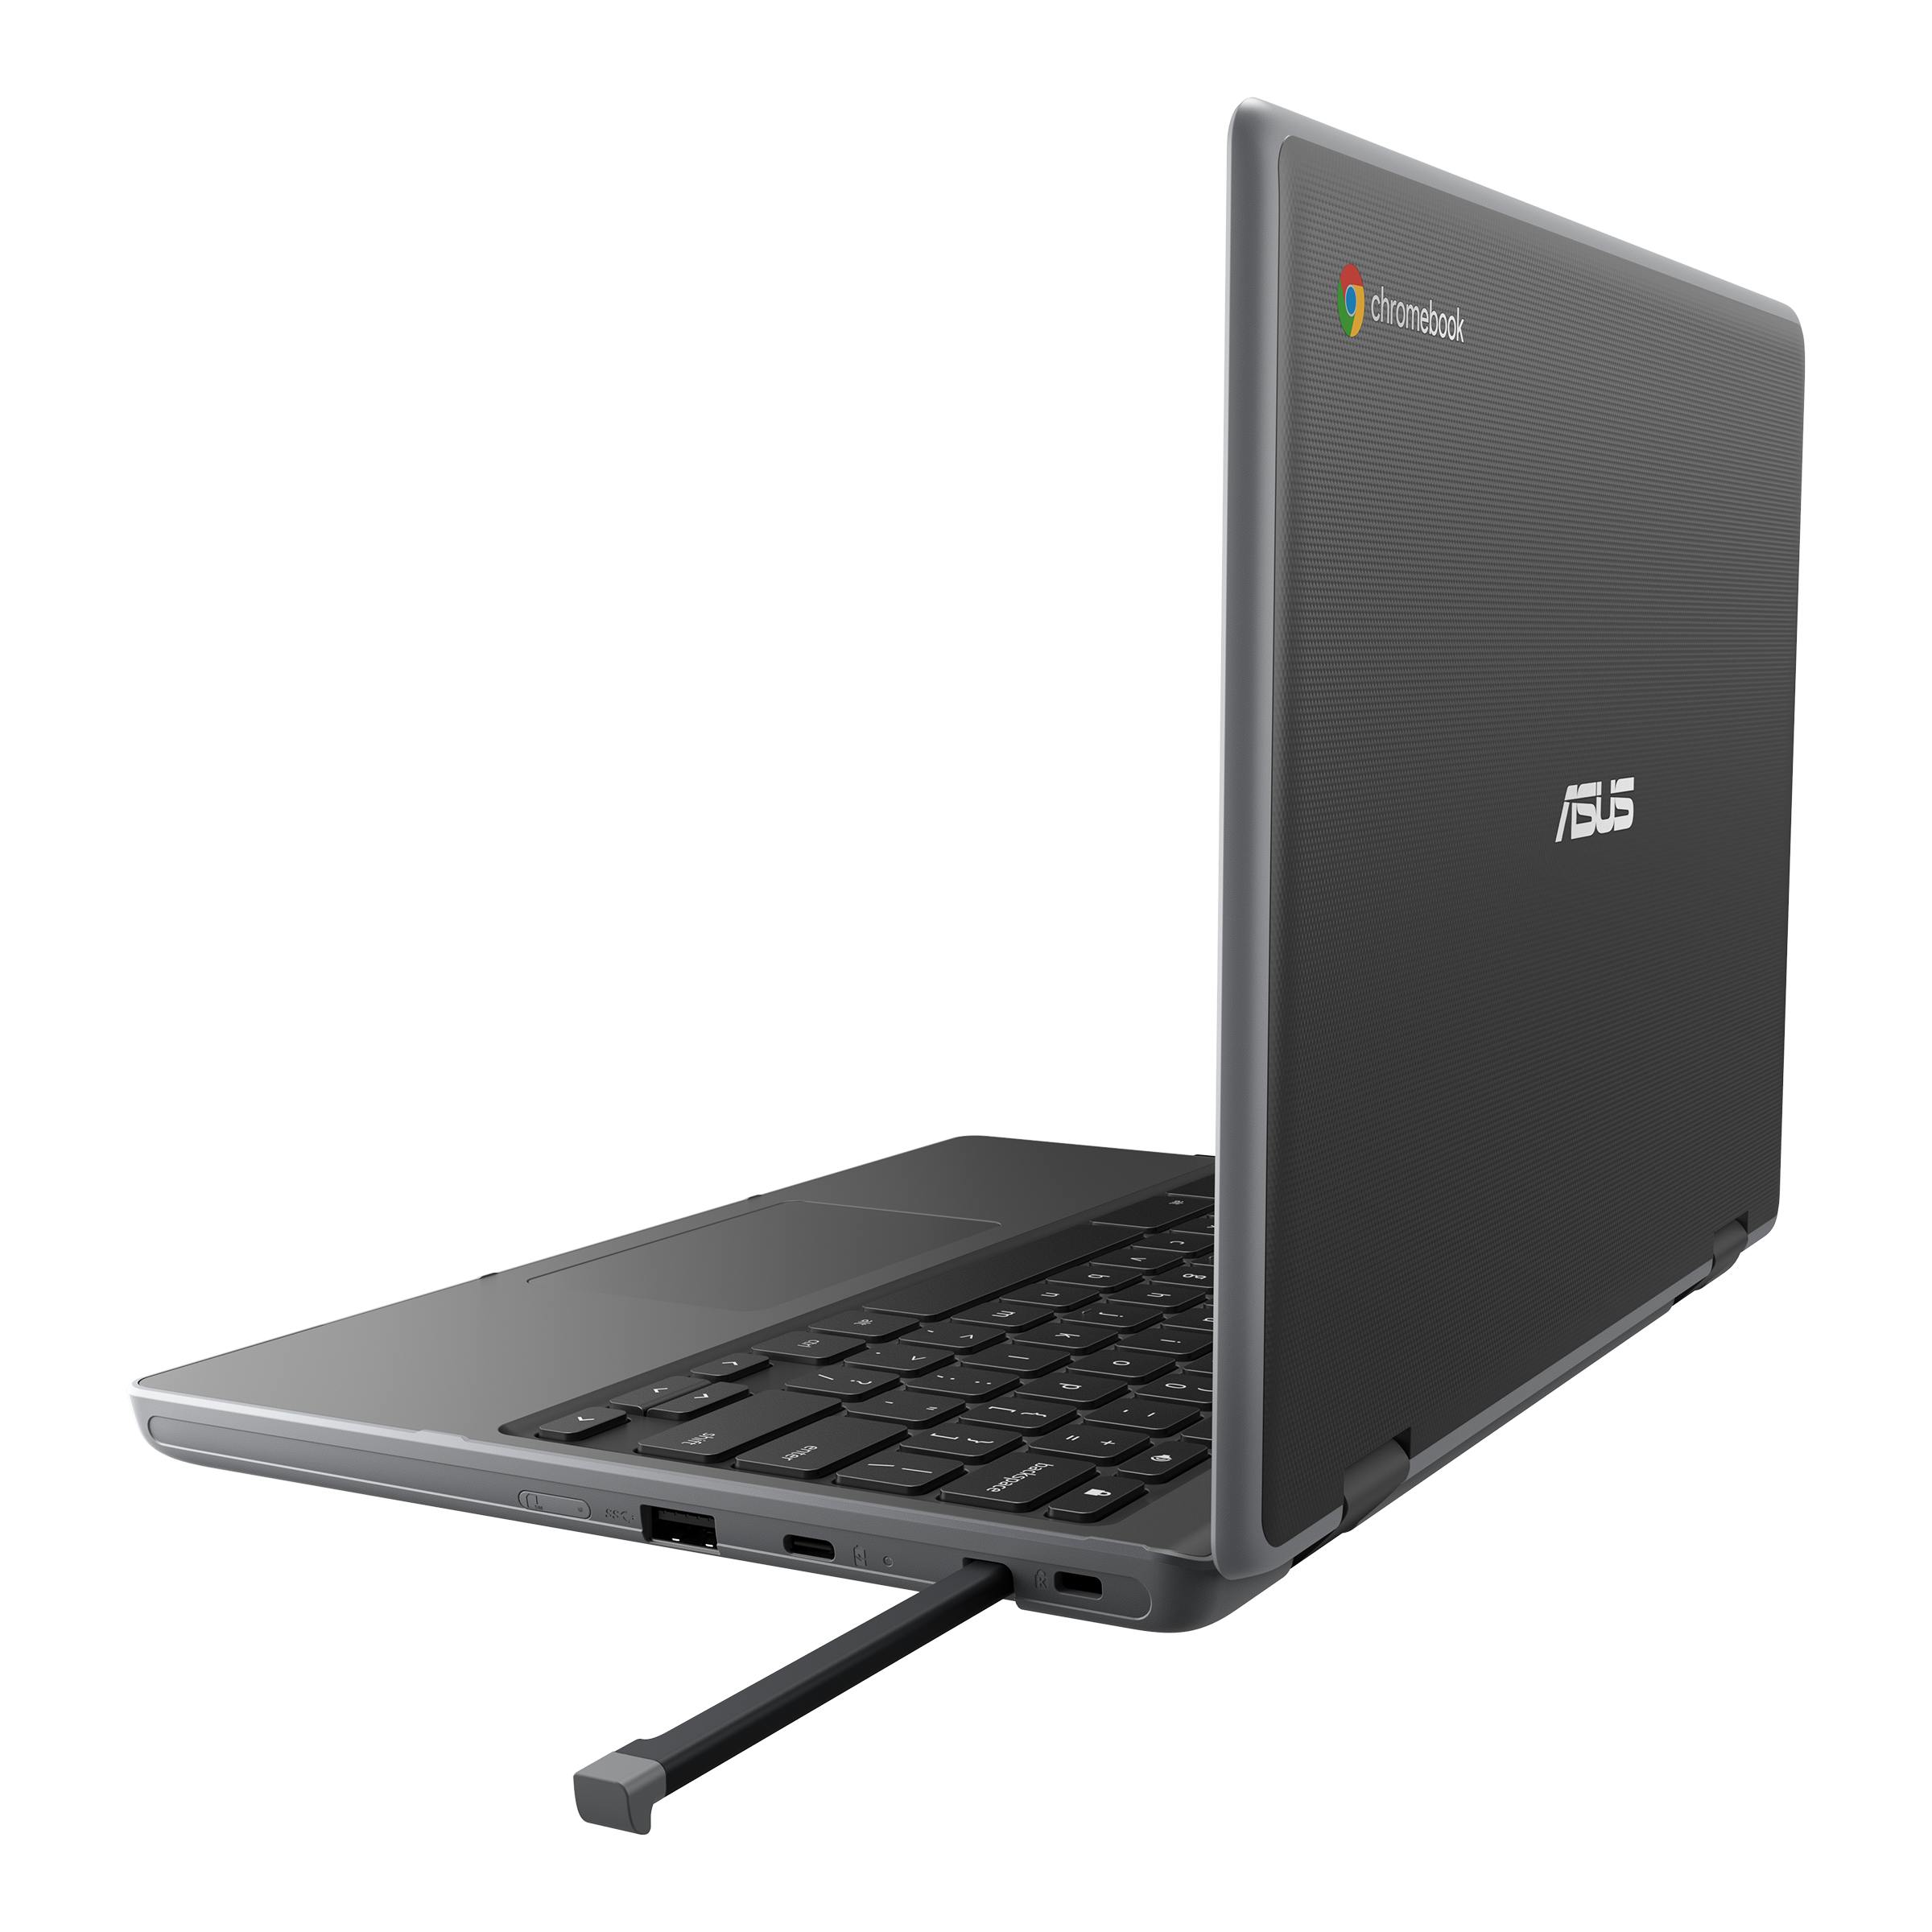 ASUS Chromebook Flip CR1 (CR1100)｜Laptops For Students｜ASUS USA